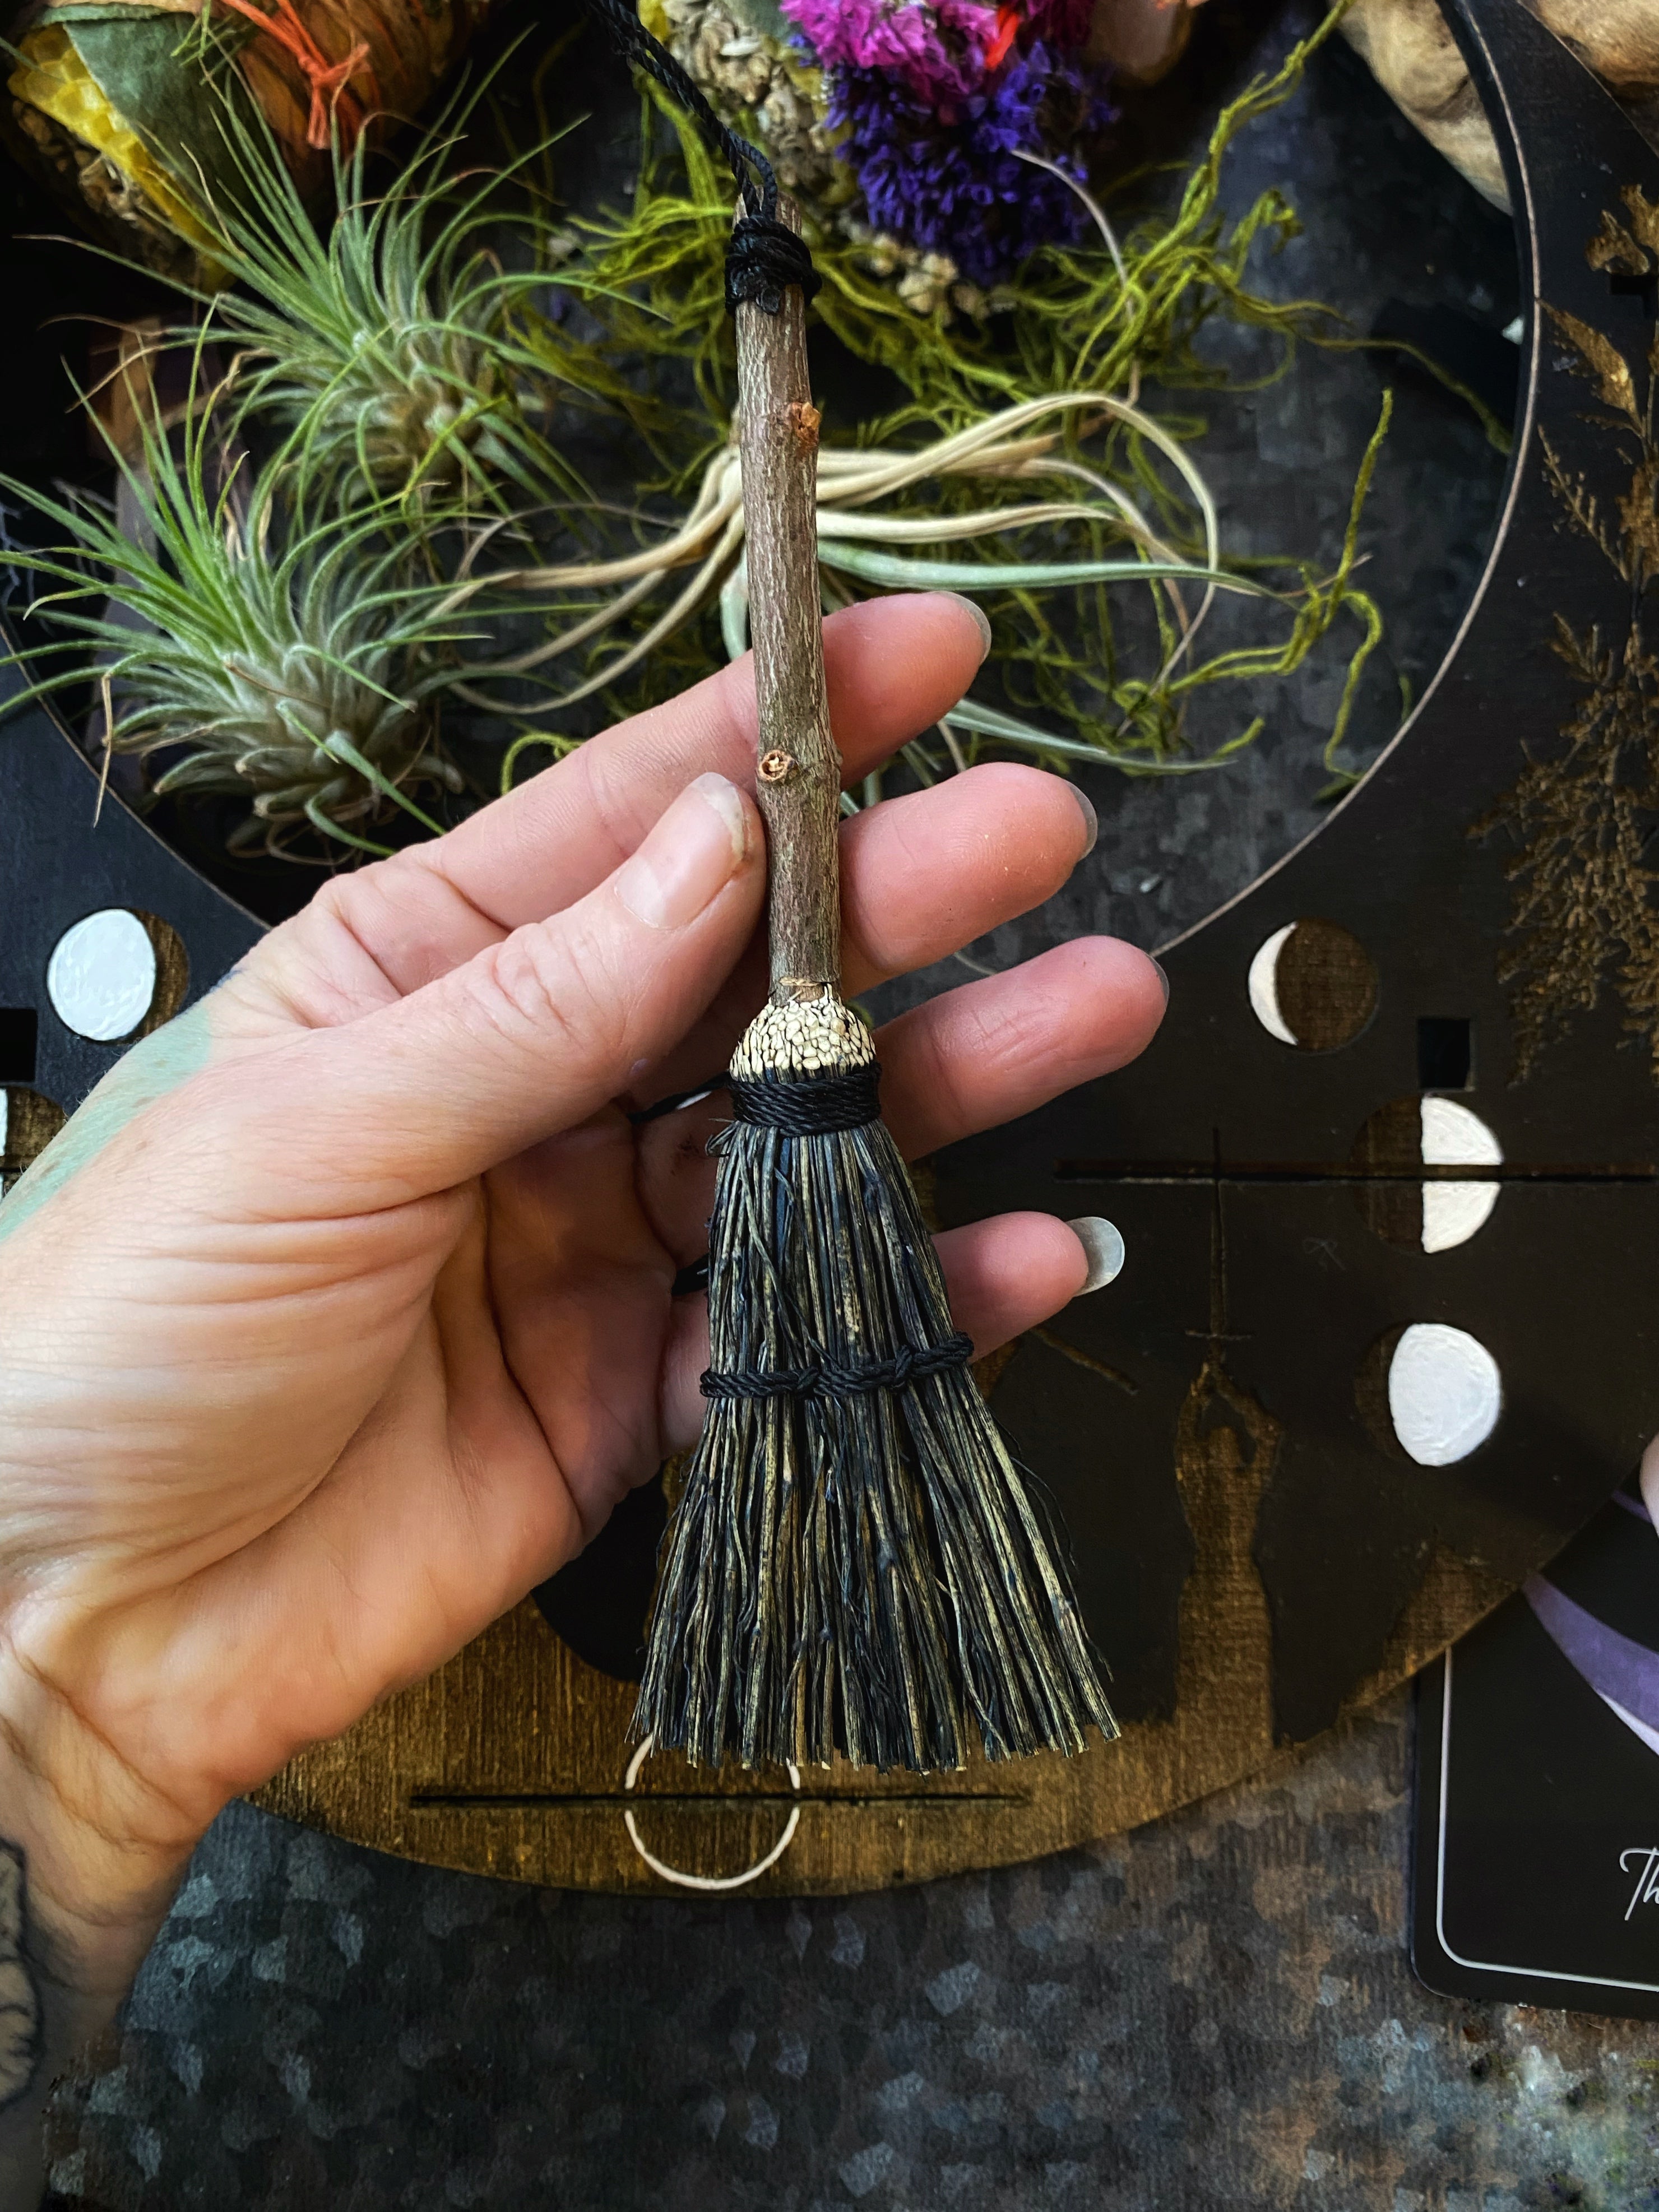 Miniature Besom/Sweeper Broom or Hand Brooms -3-5" Tampico -(functional or as an ornament)